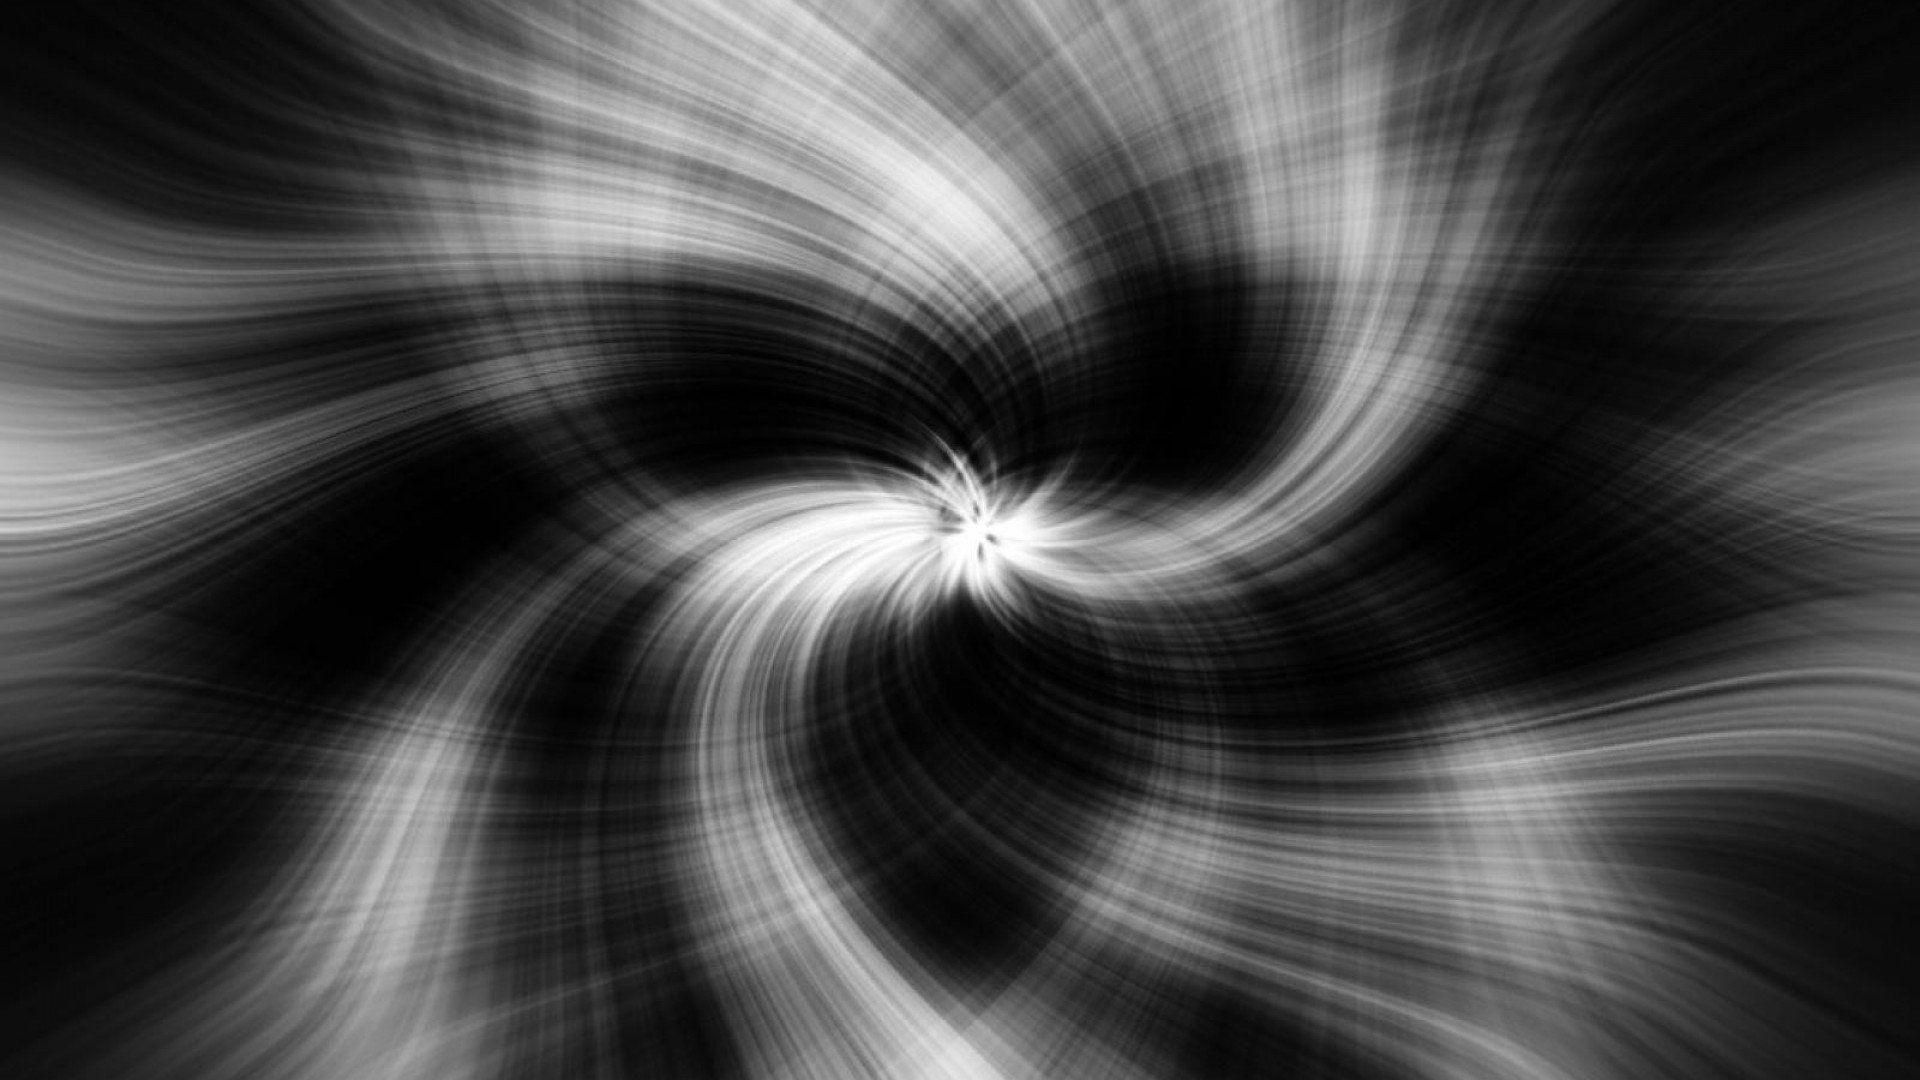 Black And White Abstract Wallpaper, Black And White Abstract